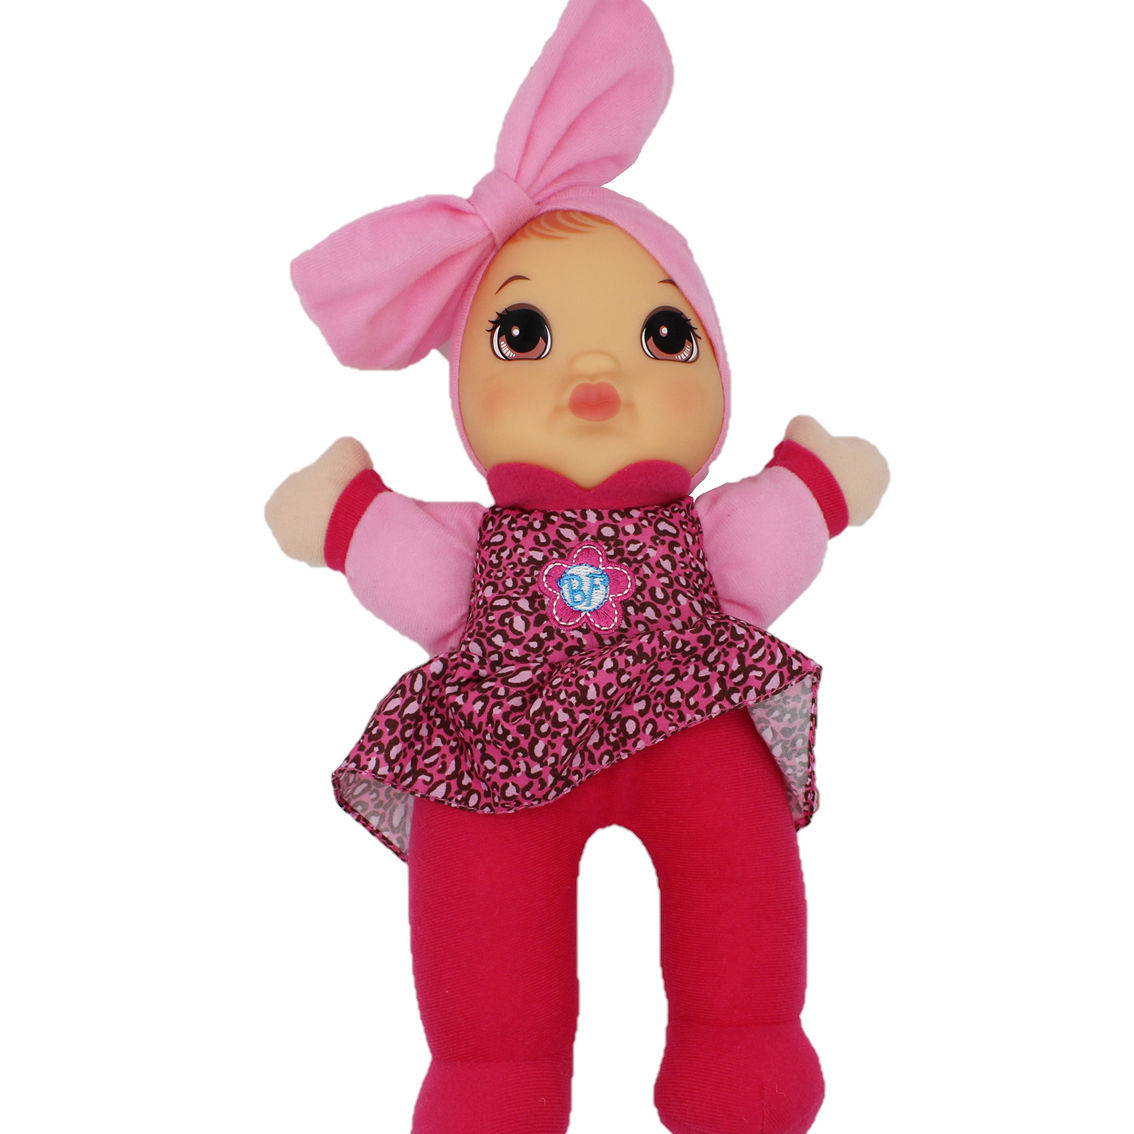 Goldberger Baby's First Kisses Bi Lingual Doll, English and Spanish - Image 4 of 5